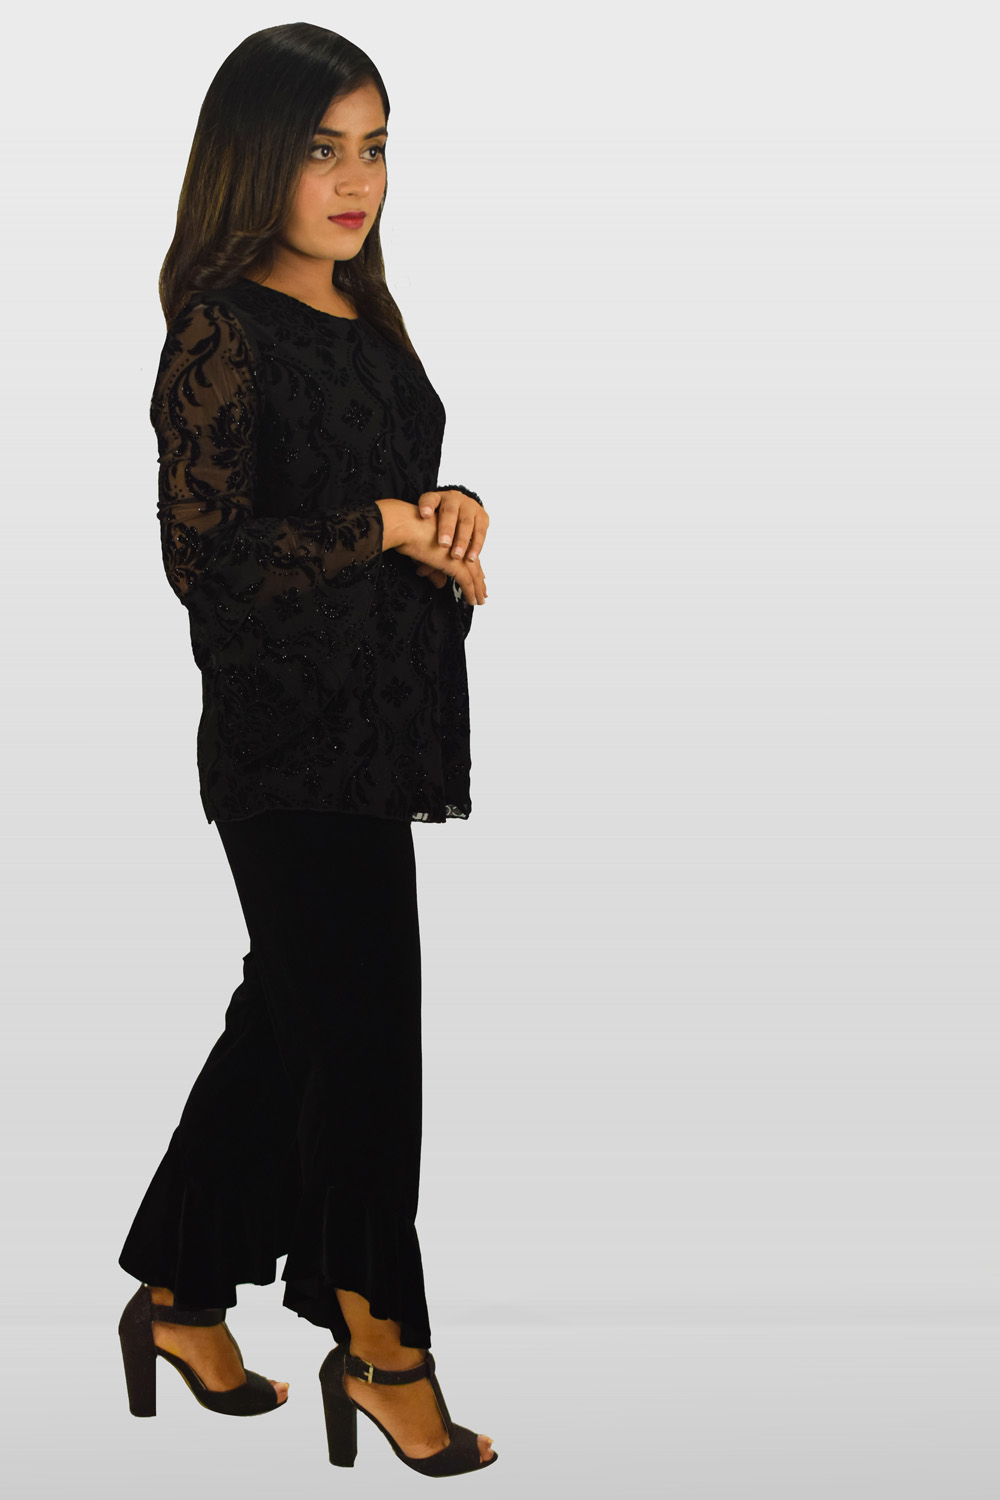 Black Lace Frill Long Sleeved Top